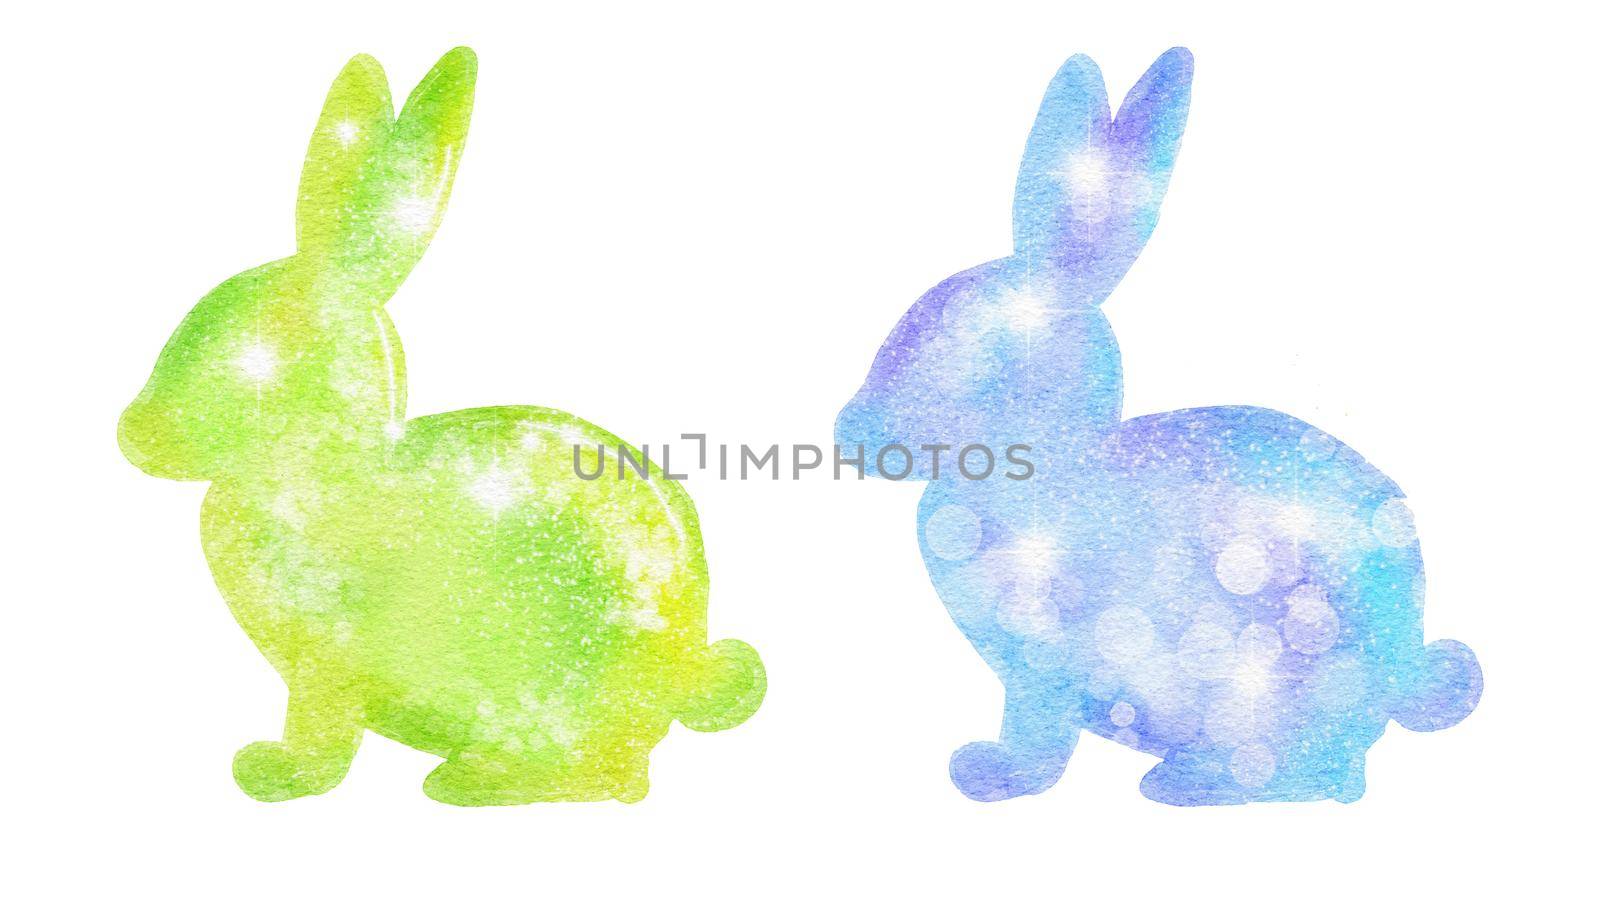 Watercolor Easter bunnies rabbits with shiny shimmering glitter texture, pastel colors green blue design. April spring religious celebration, for cards invitations prints